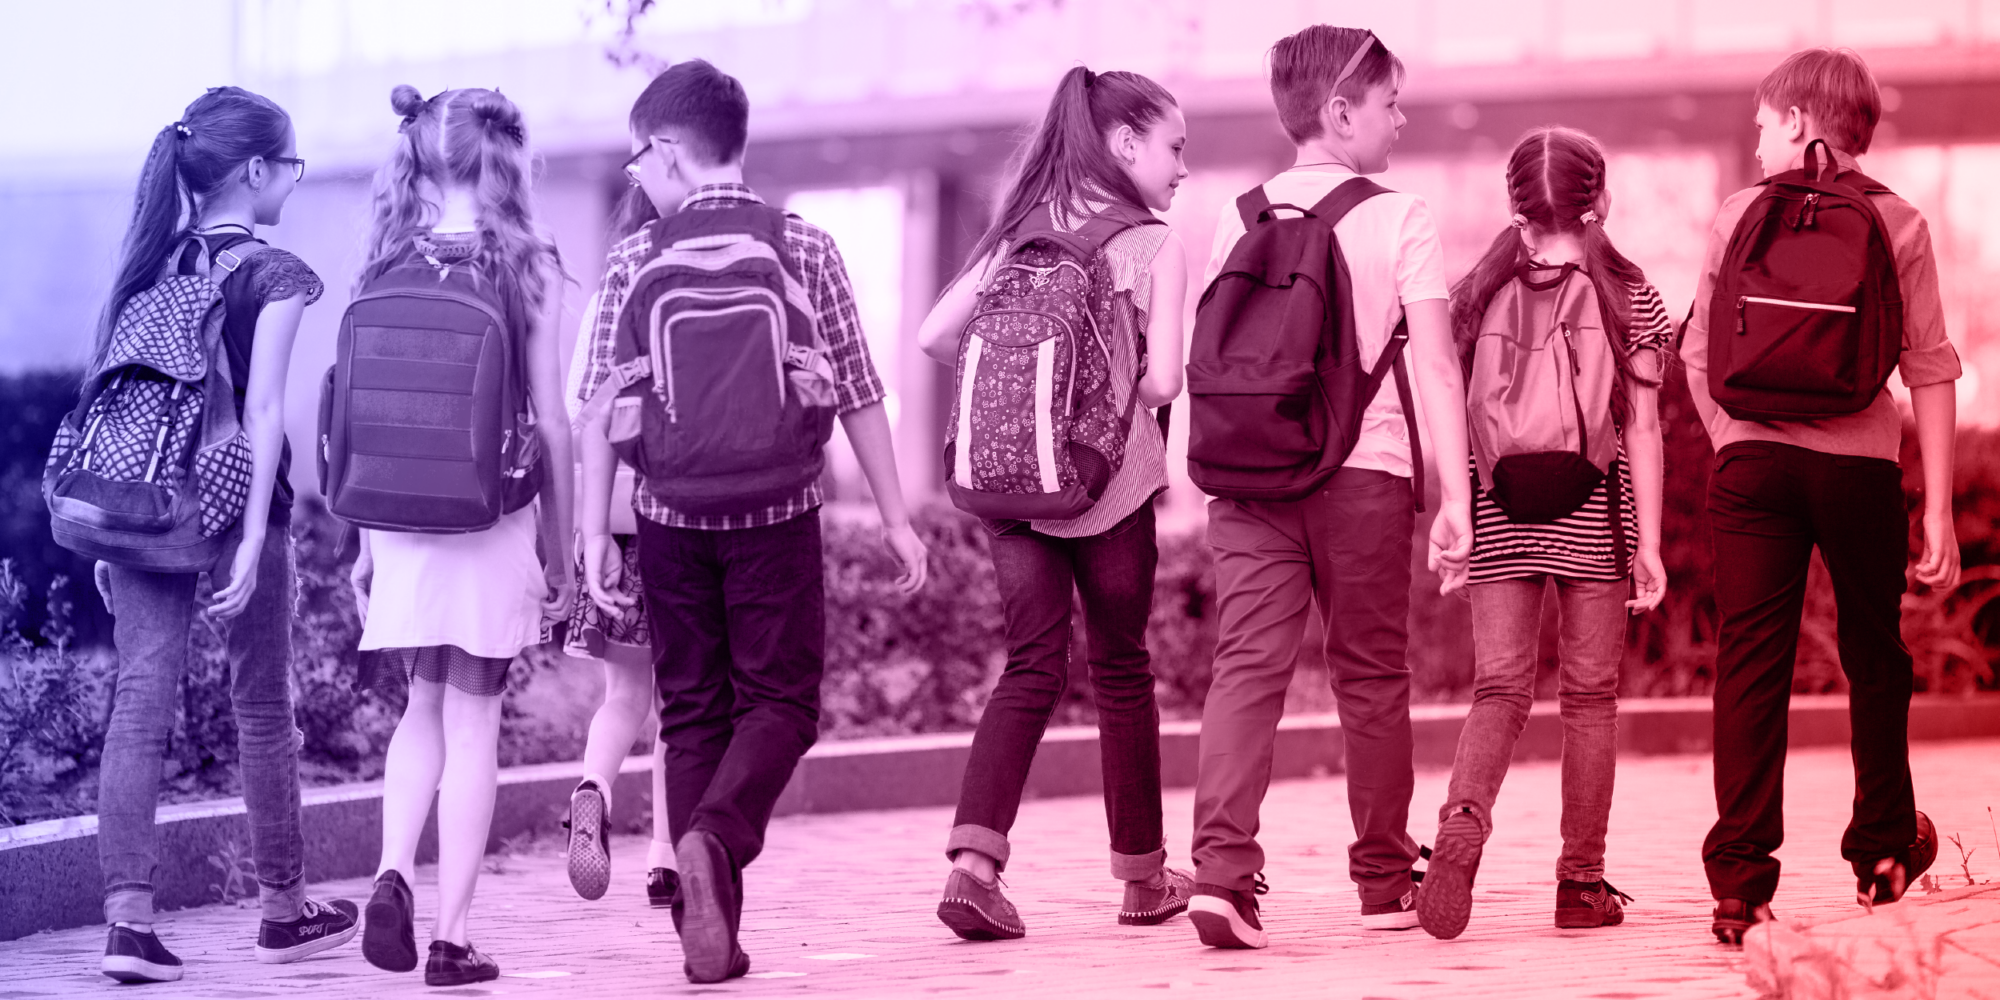 Students walking in a line